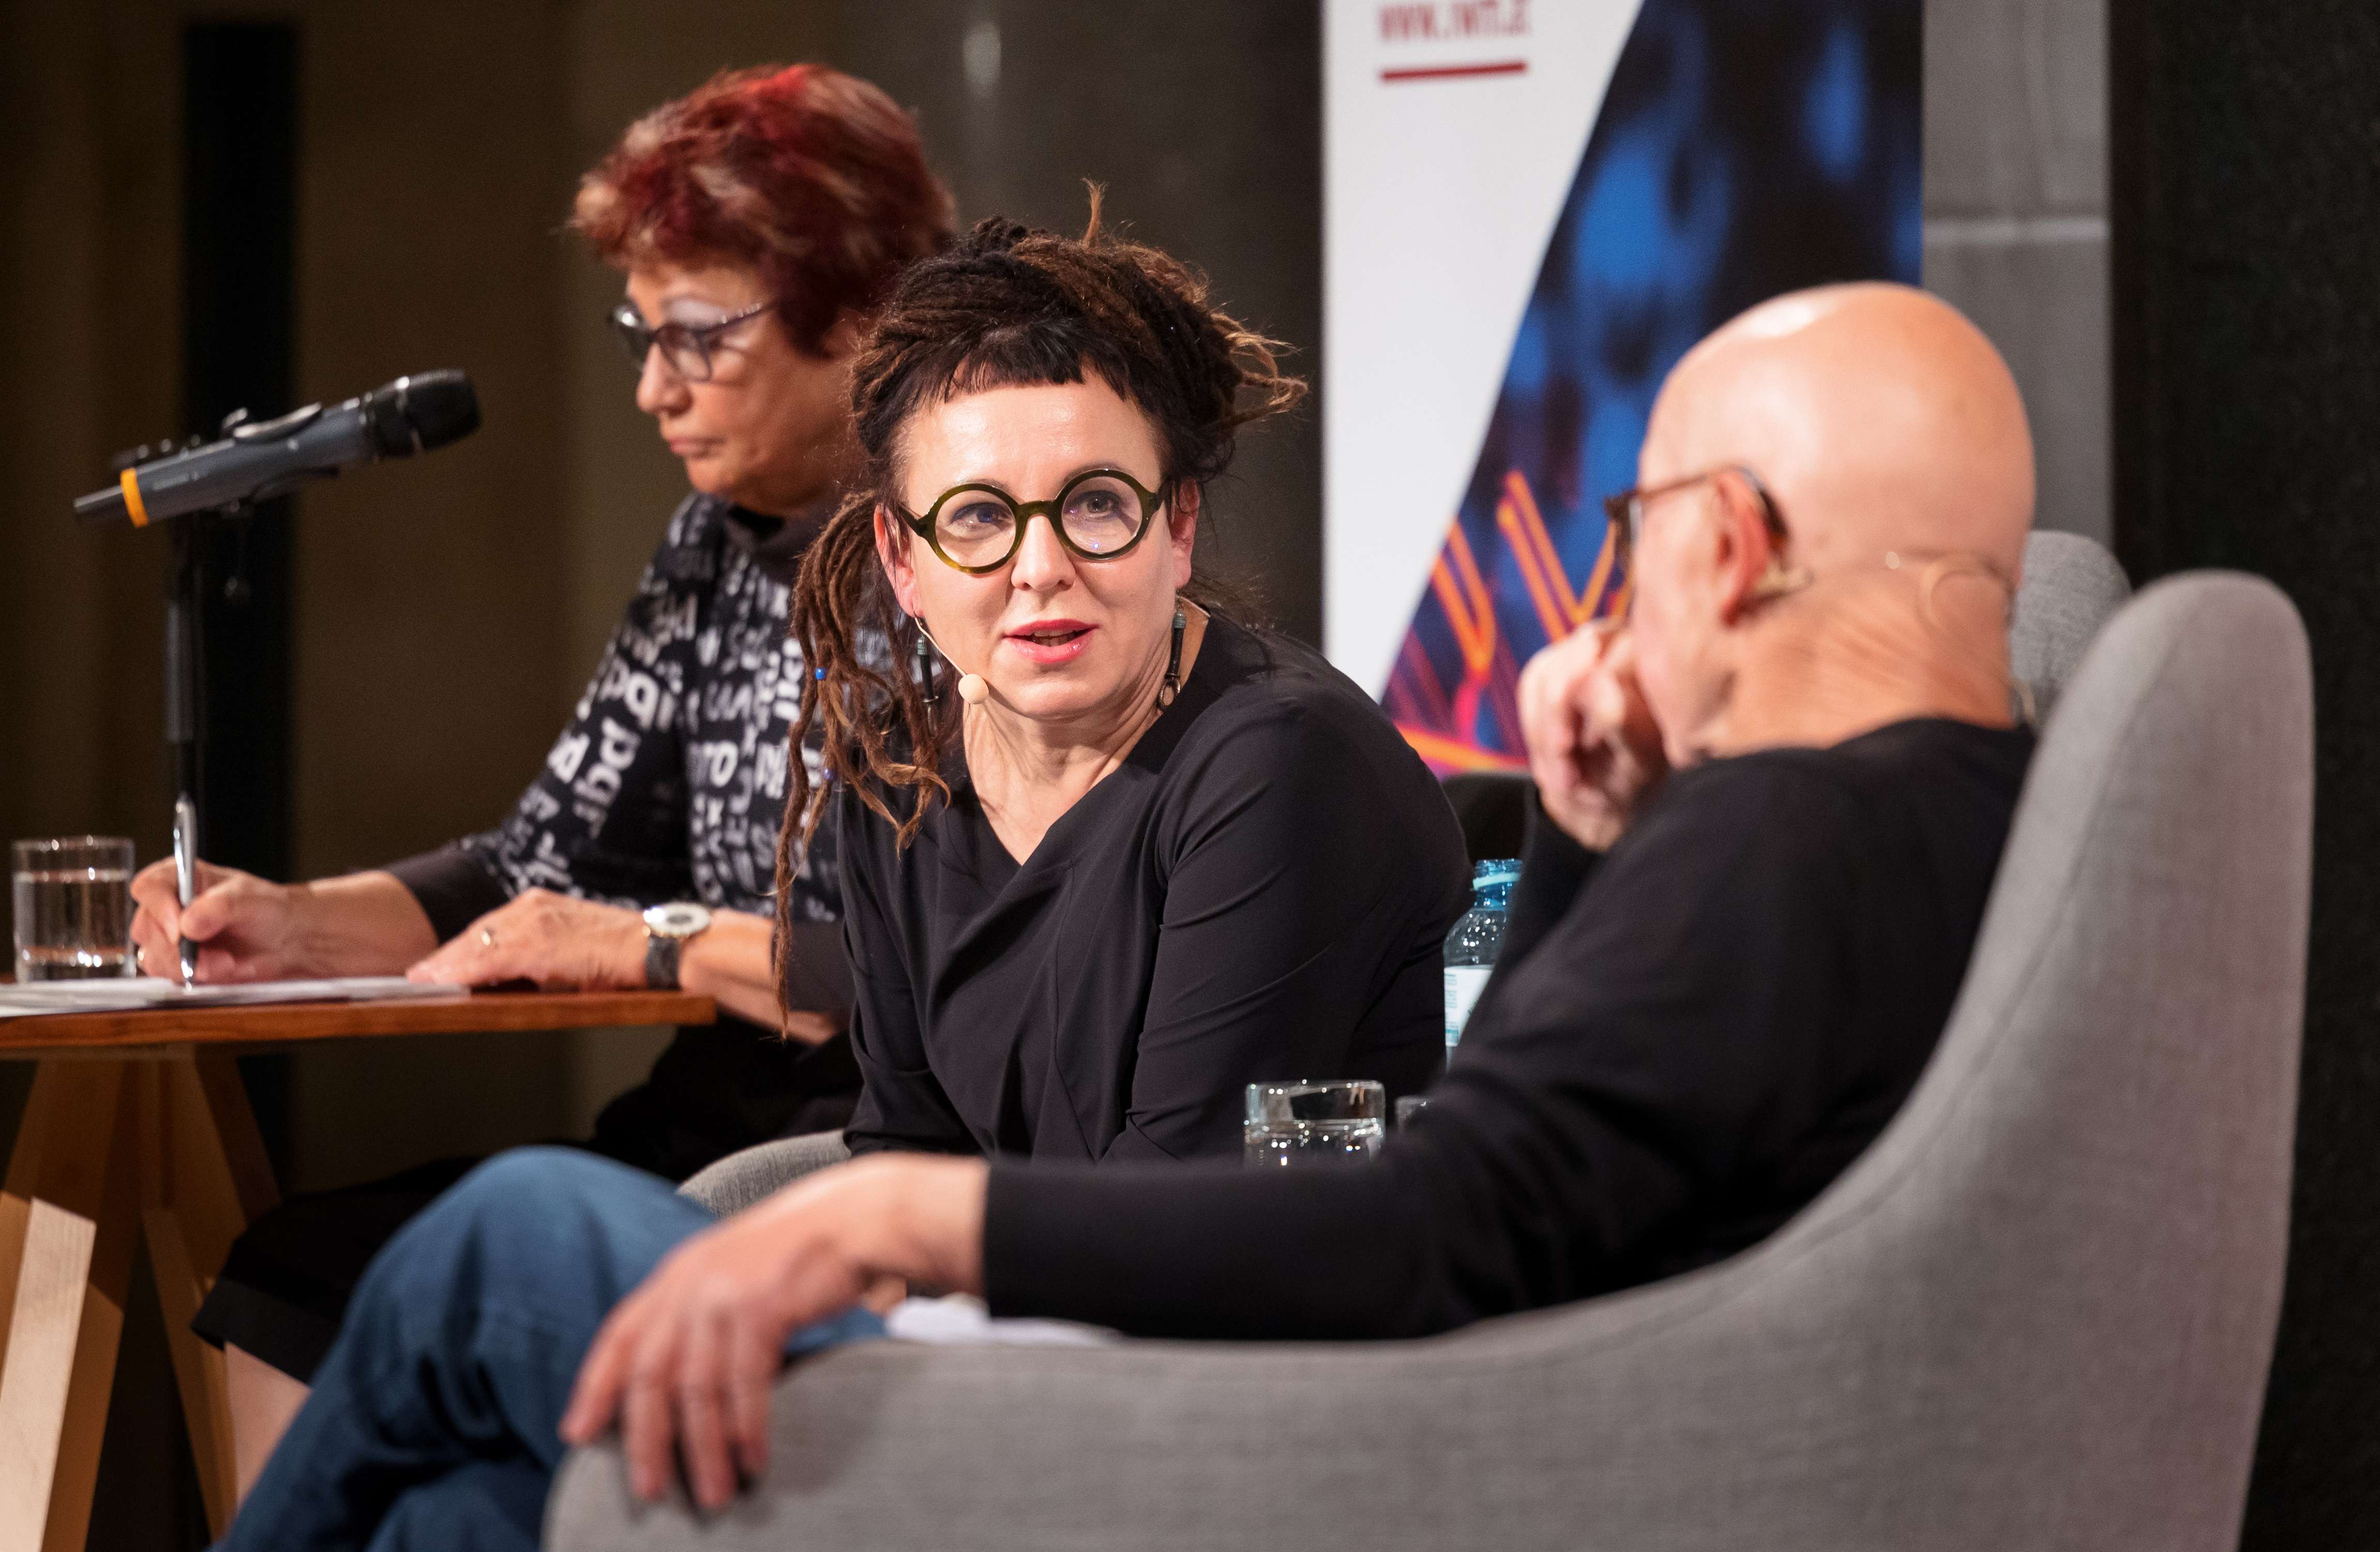 Pollack and Tokarczuk in discussion